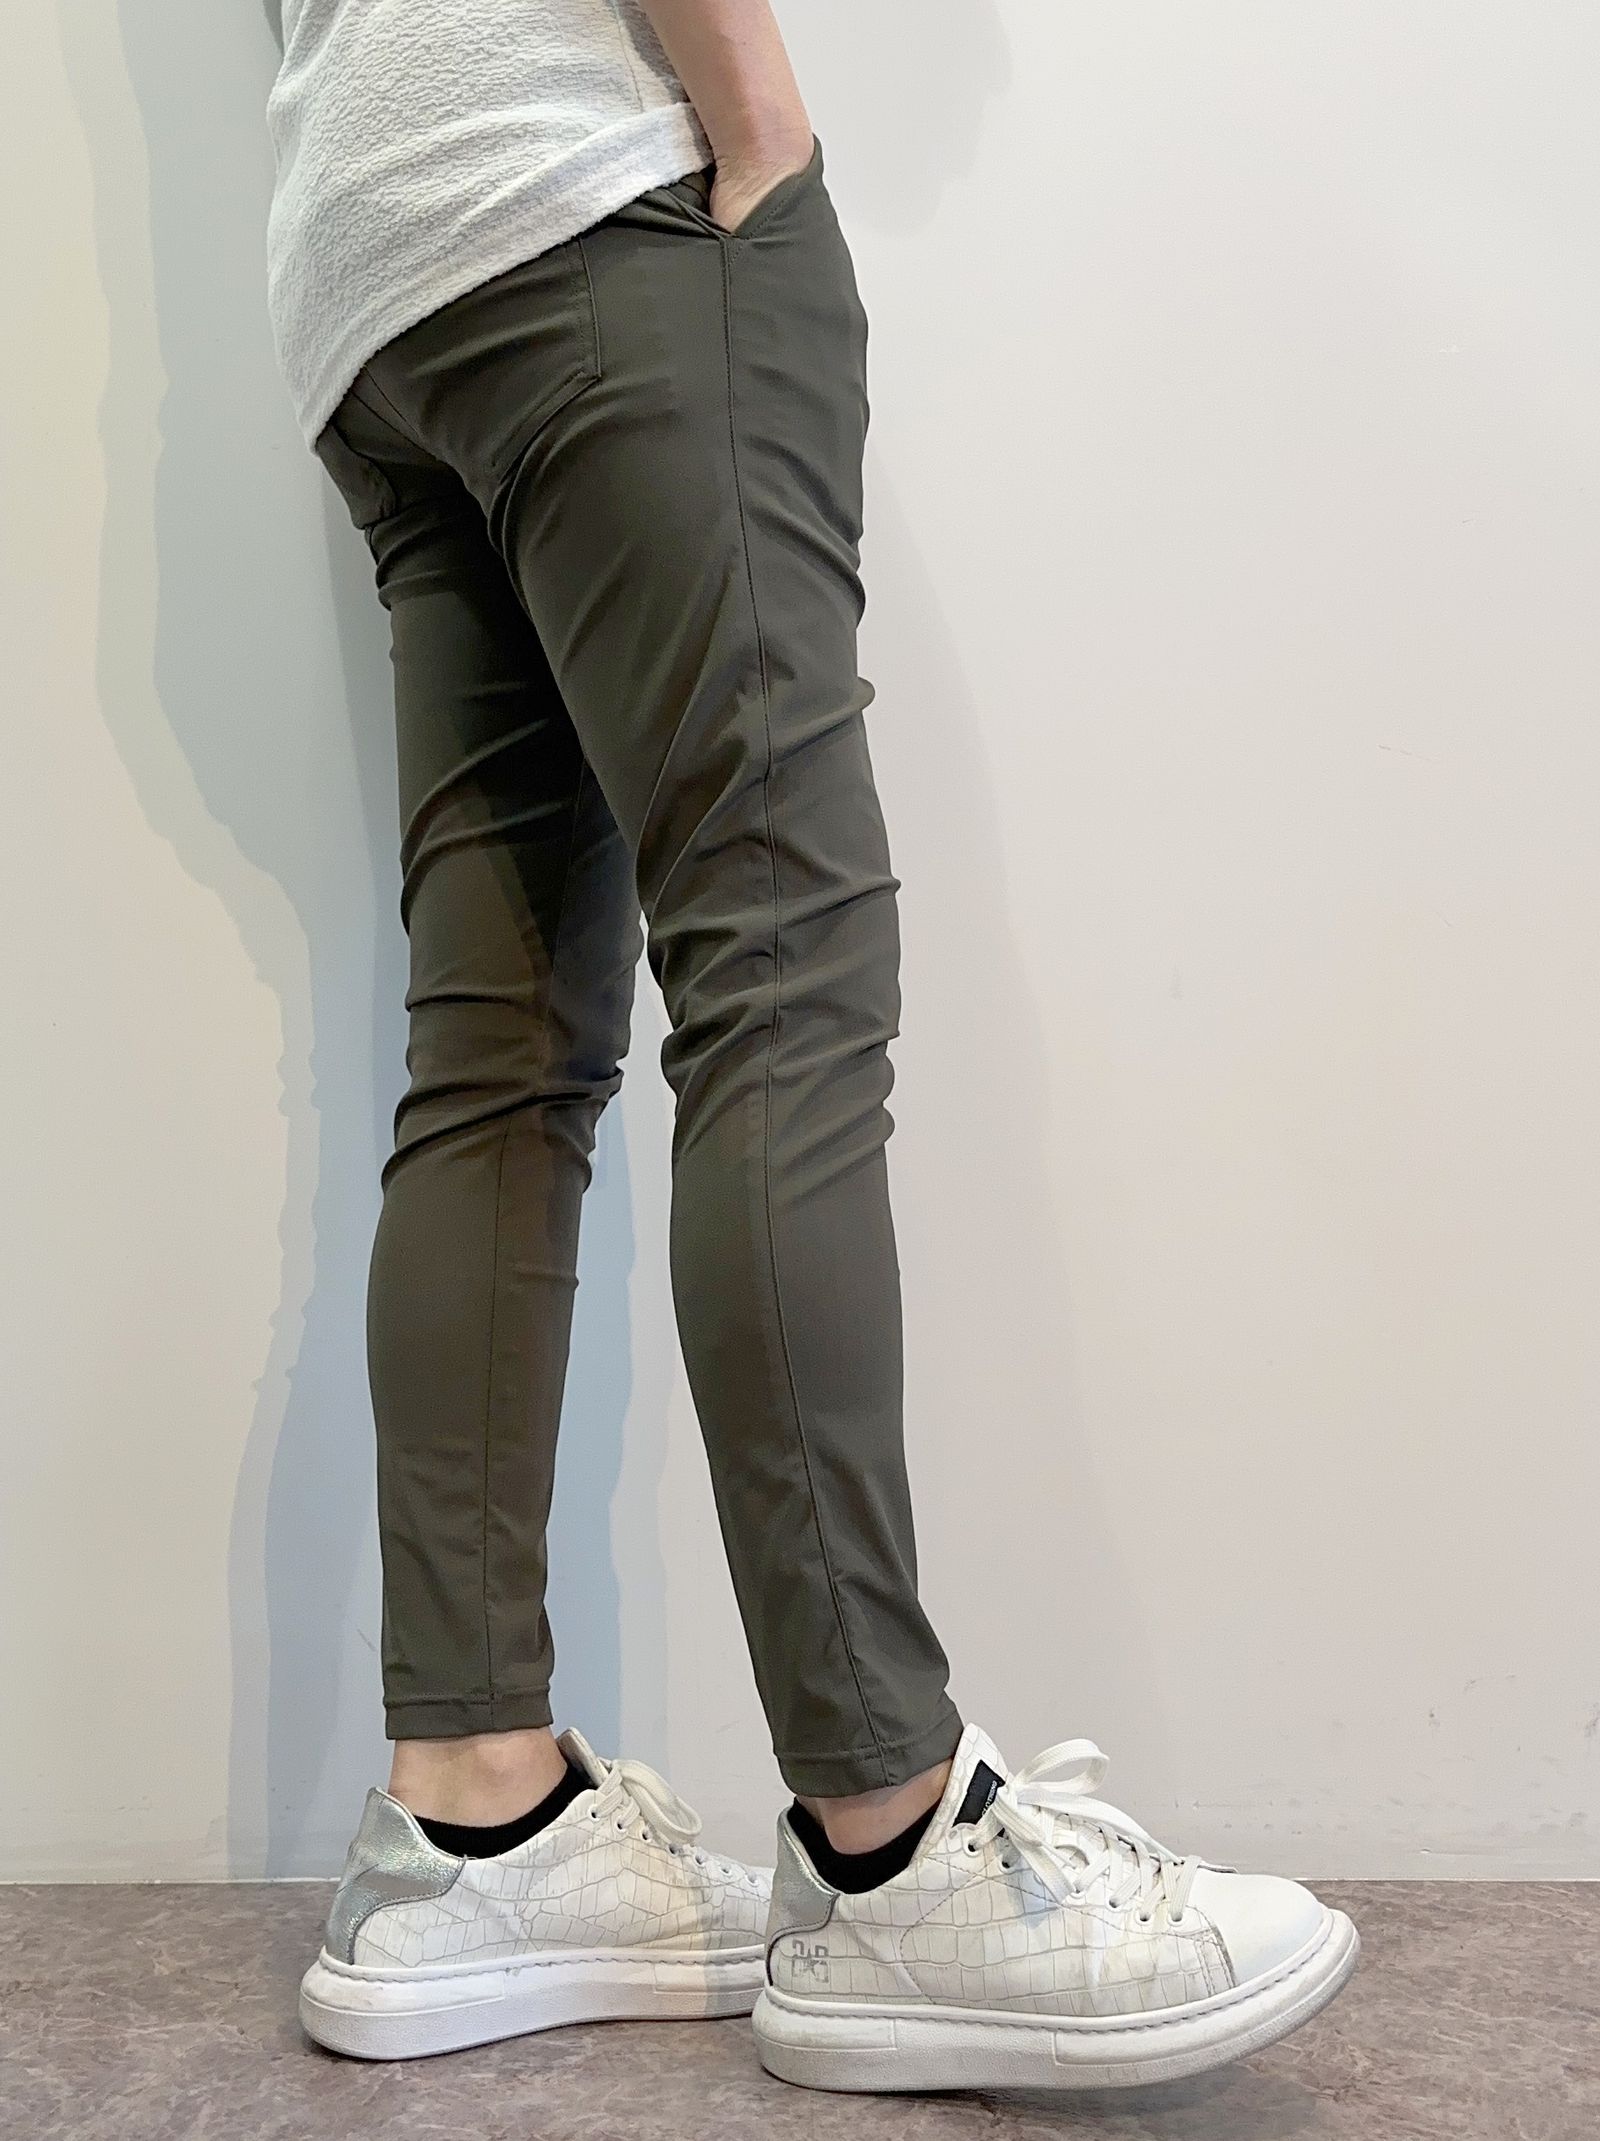 RESOUND CLOTHING - CHRIS EASY PANTS / RC27-ST-016 / ナイロン